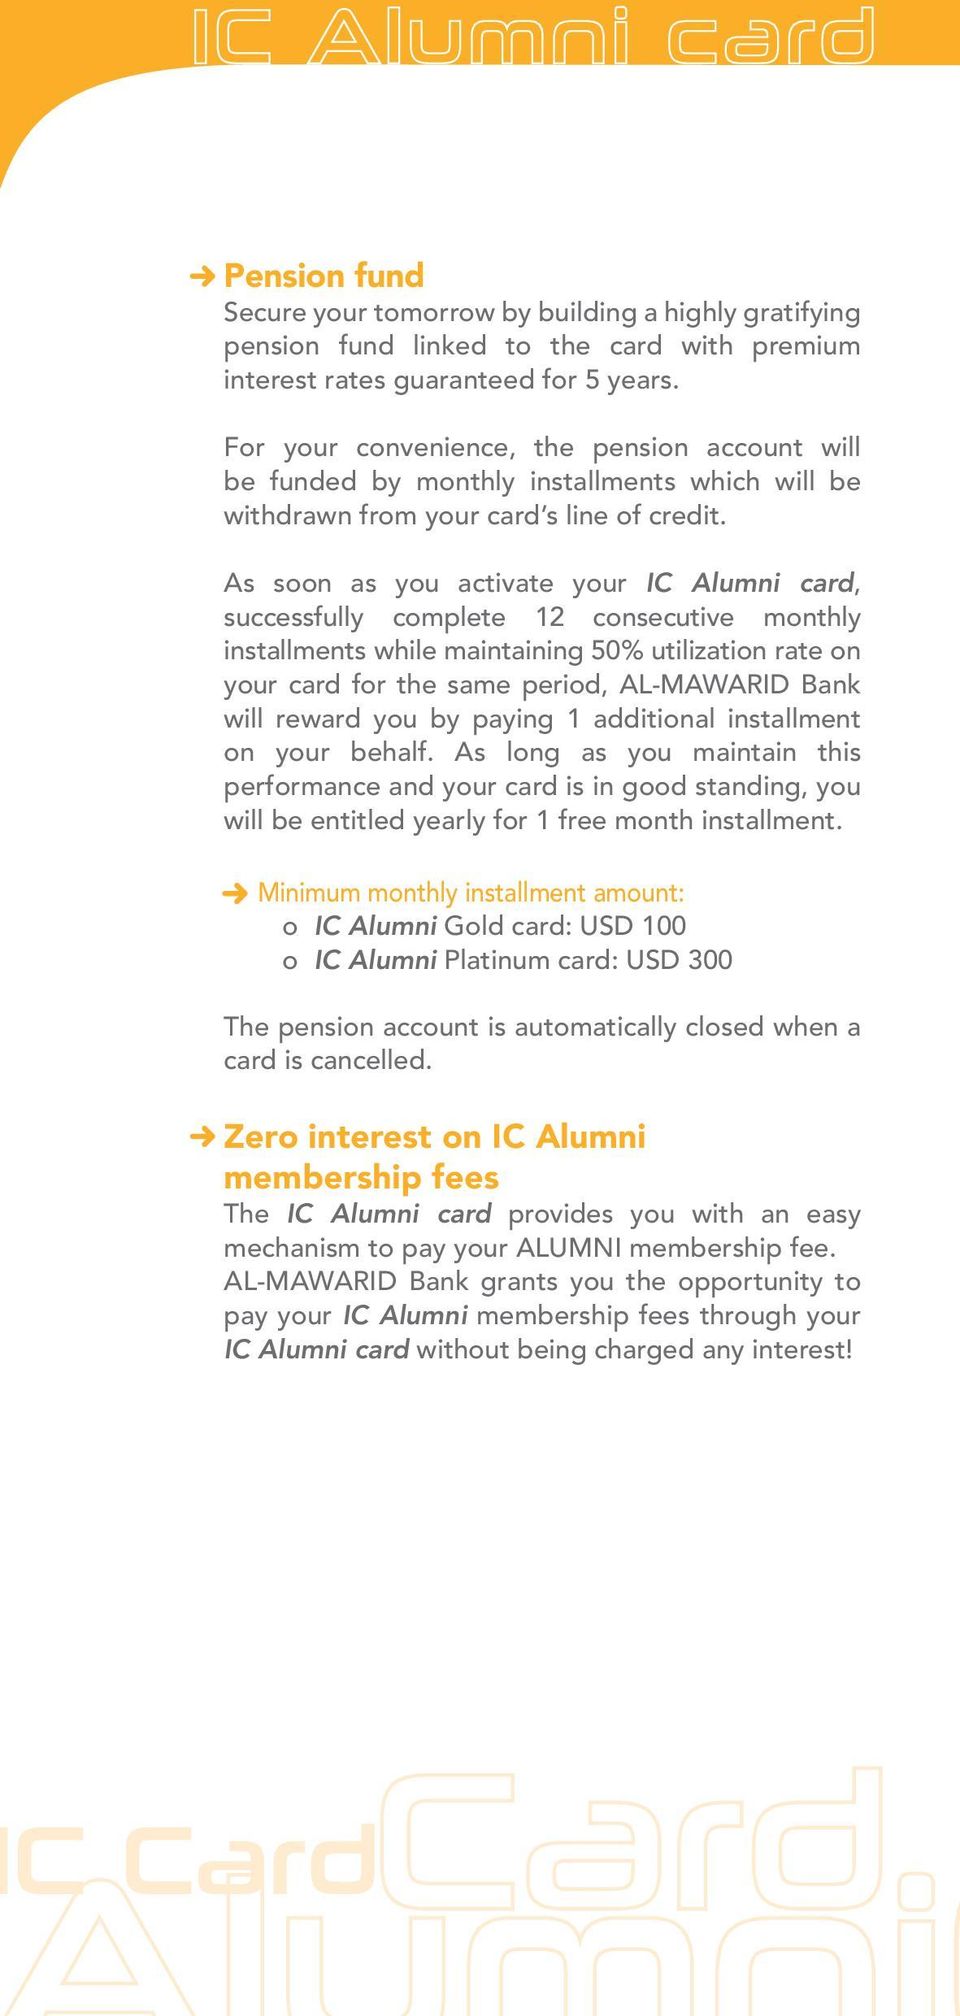 As soon as you activate your IC Alumni card, successfully complete 12 consecutive monthly installments while maintaining 50% utilization rate on your card for the same period, AL-MAWARID Bank will